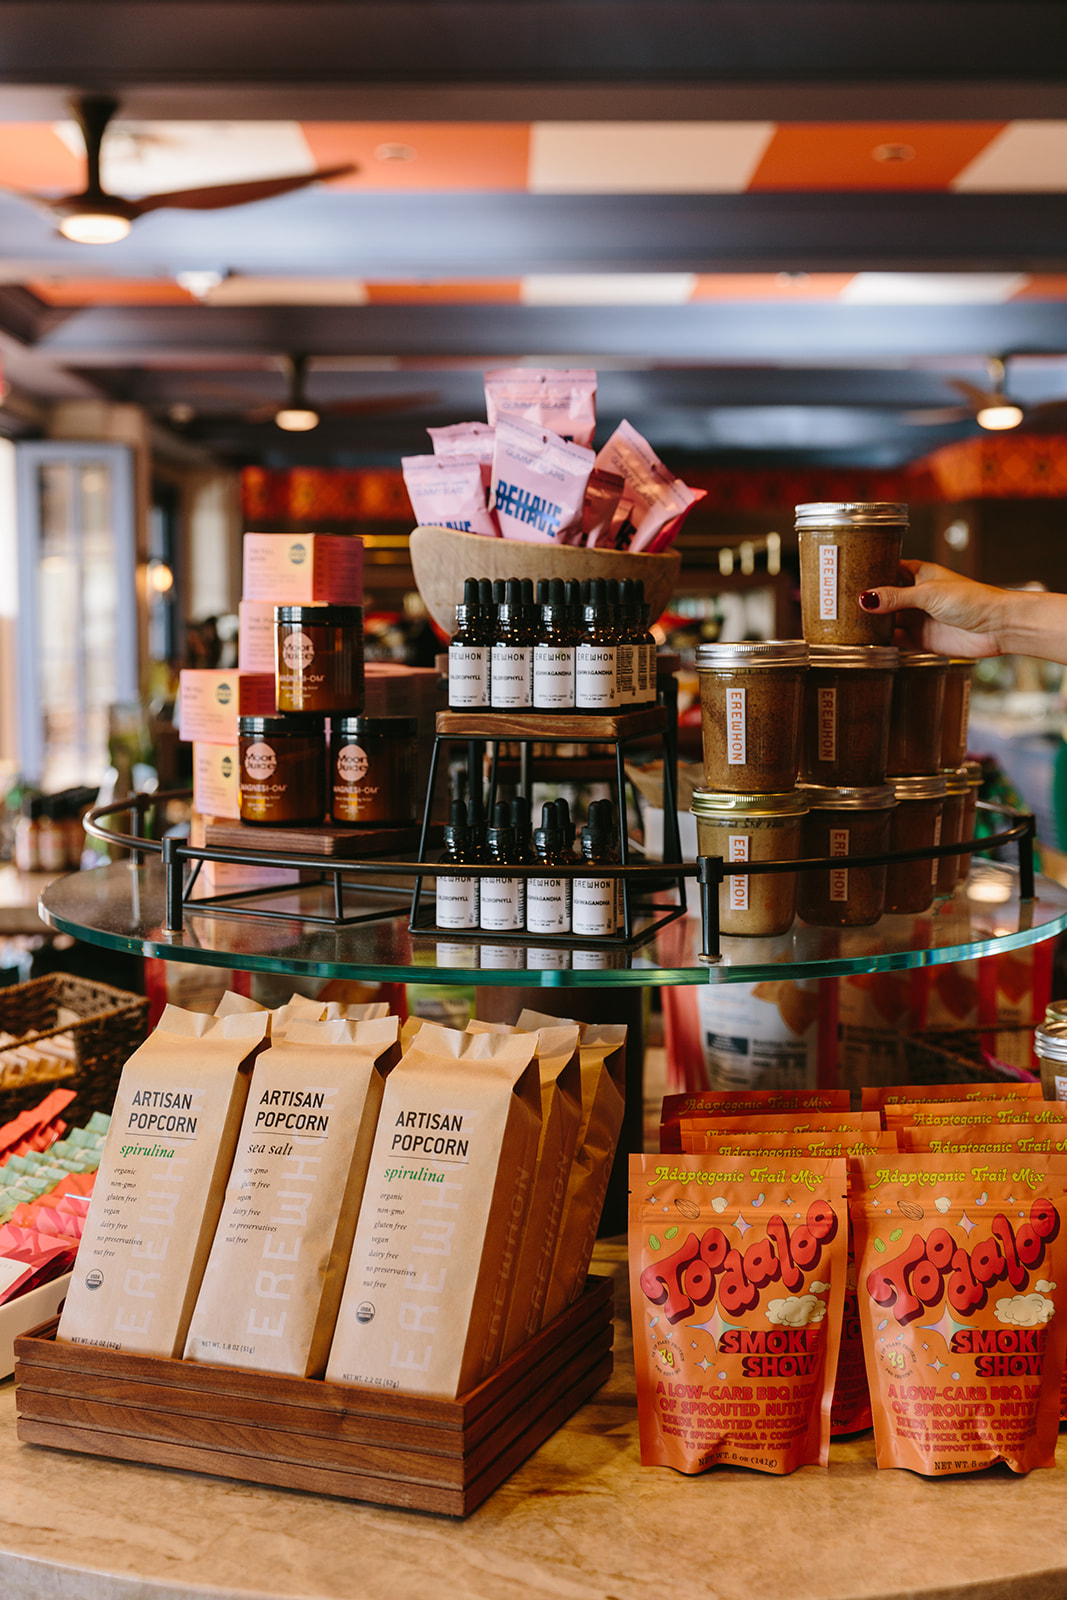 Erewhon products such as Artisan popcorn, Nut Butters, Elixirs and vitamin C packets inside of Loulu within the Grand Wailea